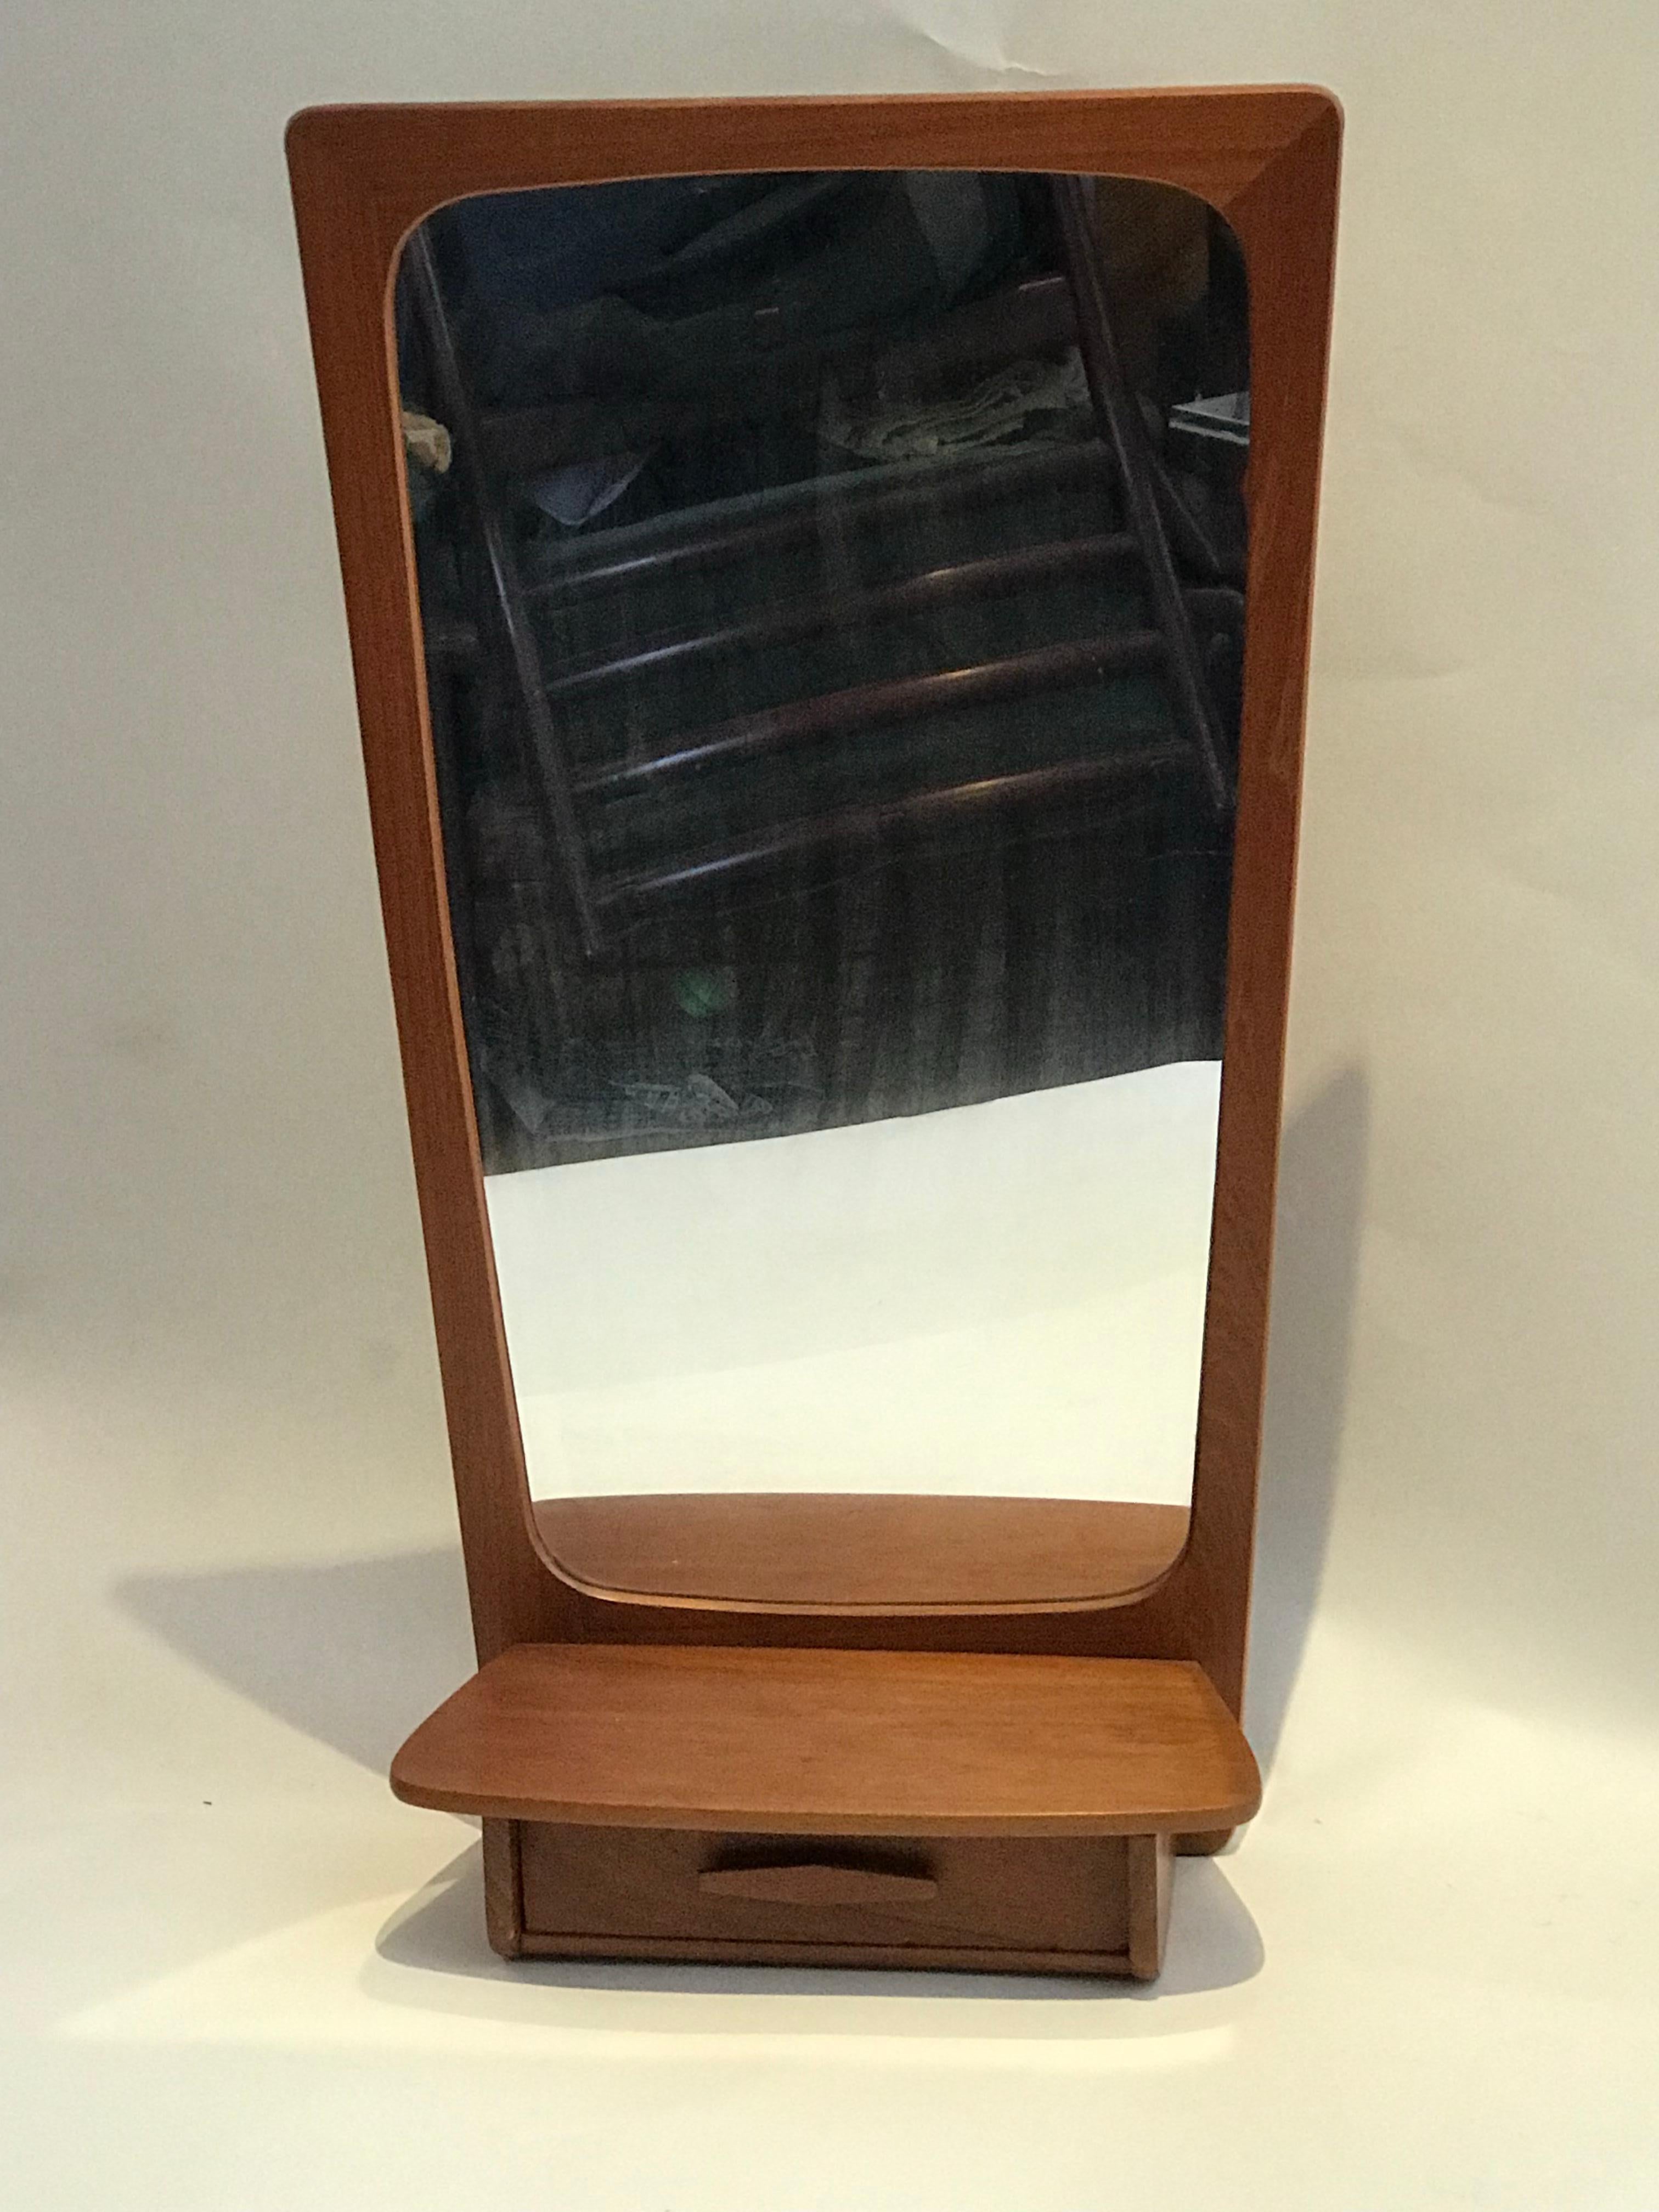 Wall-mounted teak mirror with storage or vanity.
Handsome teak wall mirror with attached storage drawer and shelf. Great for entry way or bedroom. Stylized frame and drawer pull complete this Mid-Century Modern design.